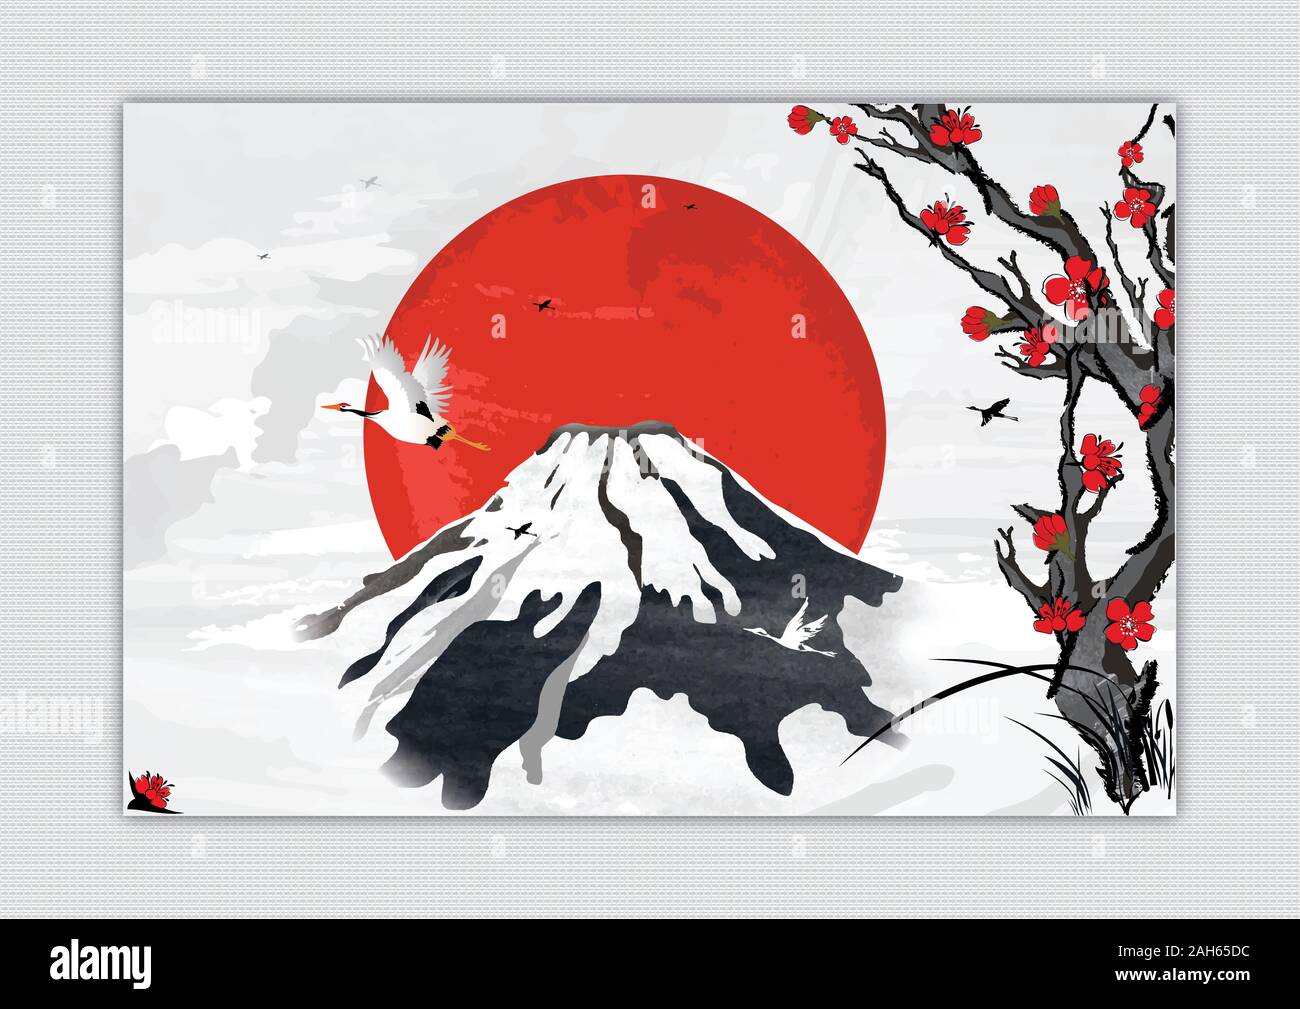 Japanese style black ink painting with crane birds flying over a landscape with stylized mountains - a giant red sun behind the Mount Fuji. Stock Photo